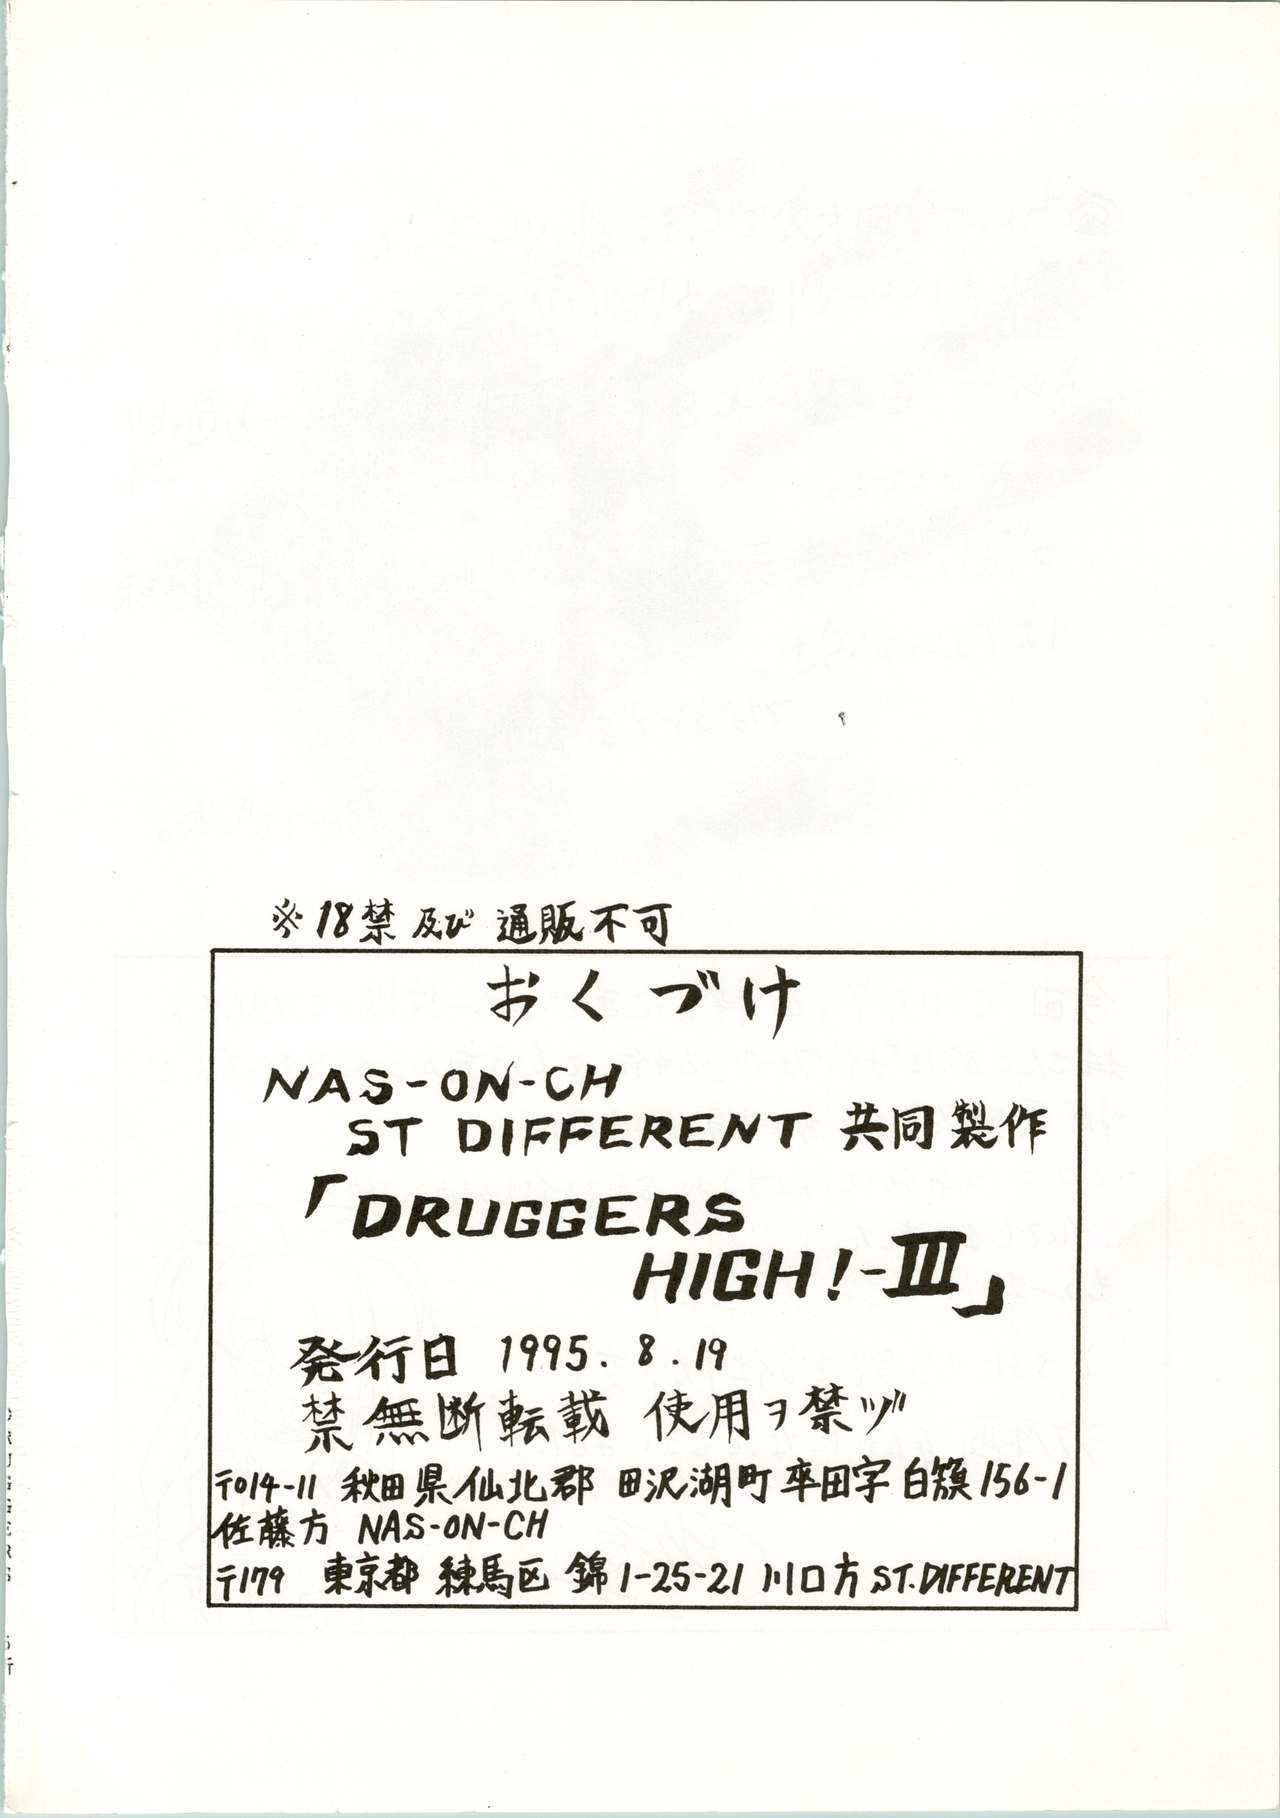 (C48) [NAS-ON-CH、ST. DIFFERENT (よろず)] DRUGGERS HIGH!! III (マクロス7)